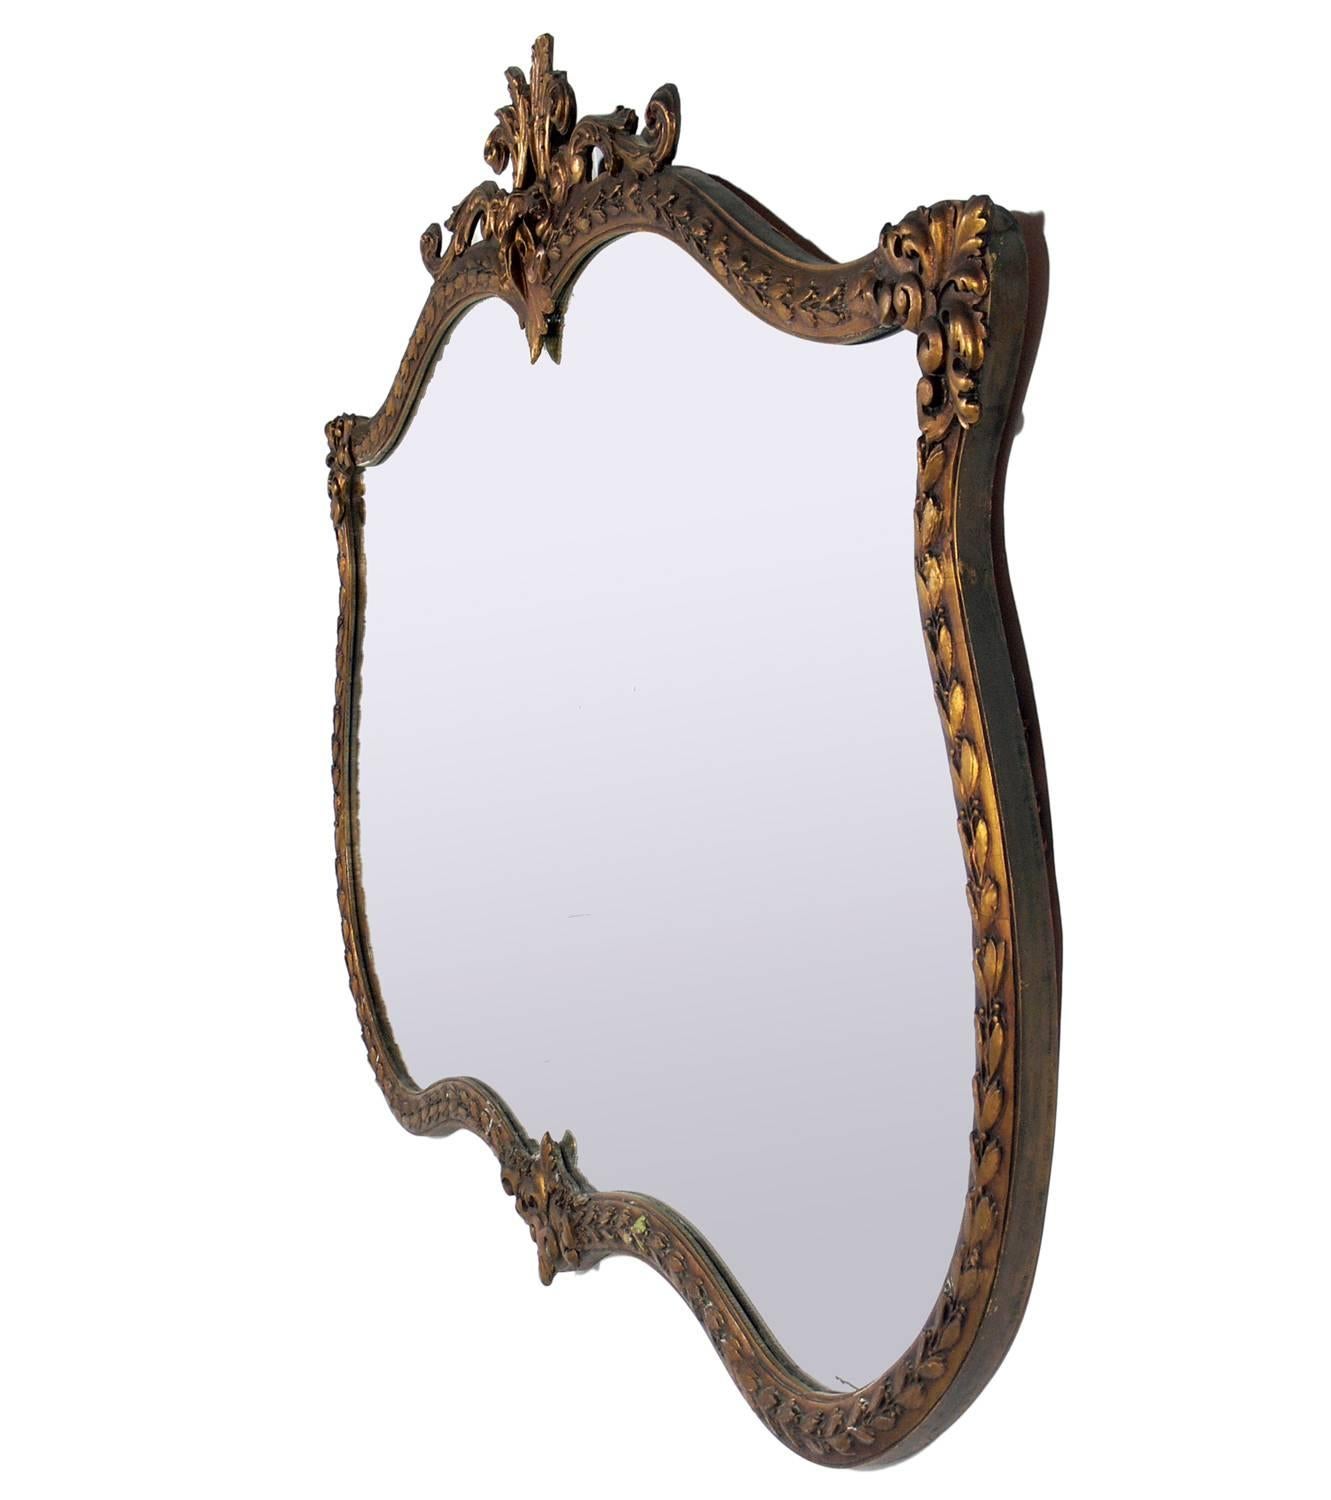 Large-scale ornate gilt mirror, American, circa 1940s, possibly earlier. It measures an impressive 5.5 feet width x 4 feet height approx. Retains warm original patina to both mirror and frame.